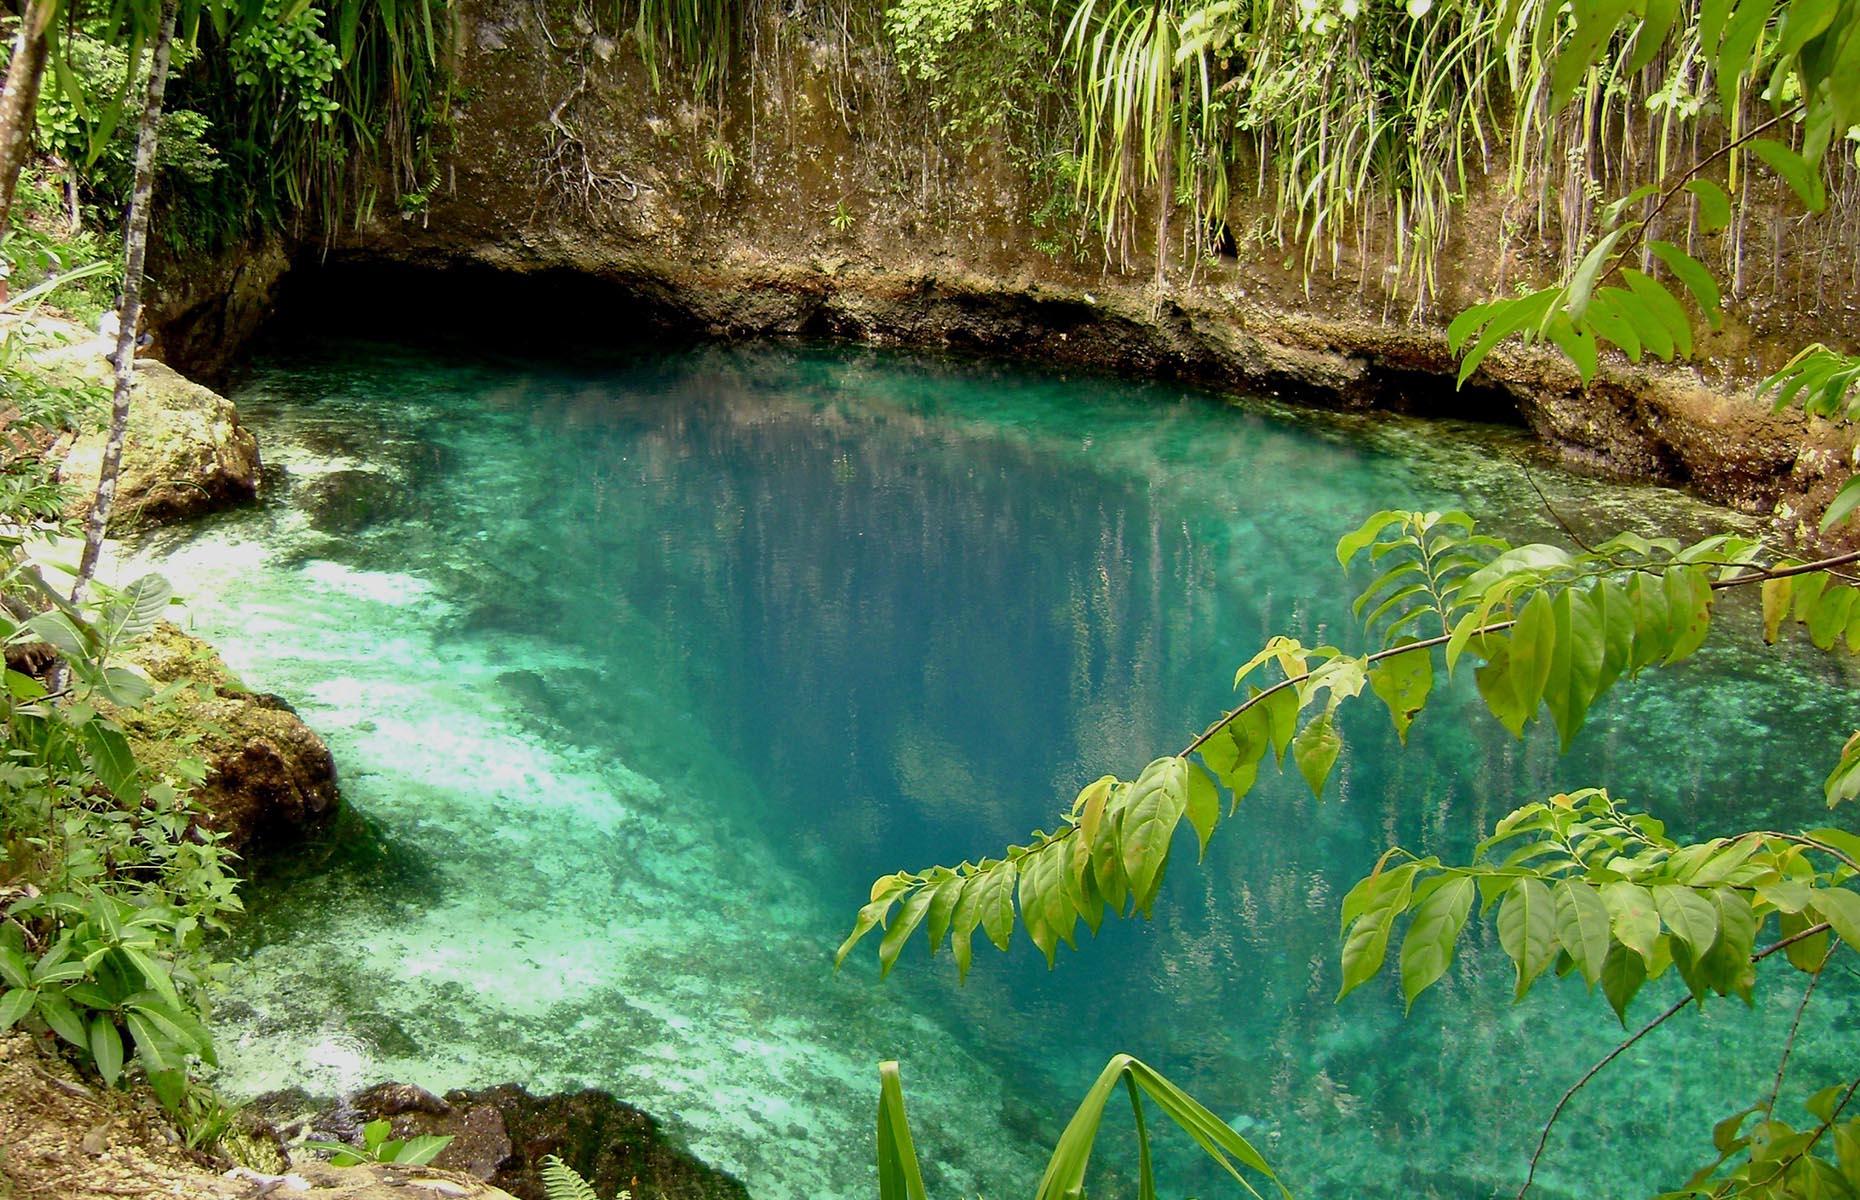 Enchanted by name and apparently enchanted by nature, this eye-poppingly blue river flows through an area of thick forest on the island of Mindanao. Locals wax lyrical about the magical waters, which are said to be inhabited by mythical creatures including engkanto (a kind of mythical spirit). It's also said that the river got its dramatic color from sapphire and jade left behind by fairies' wands.